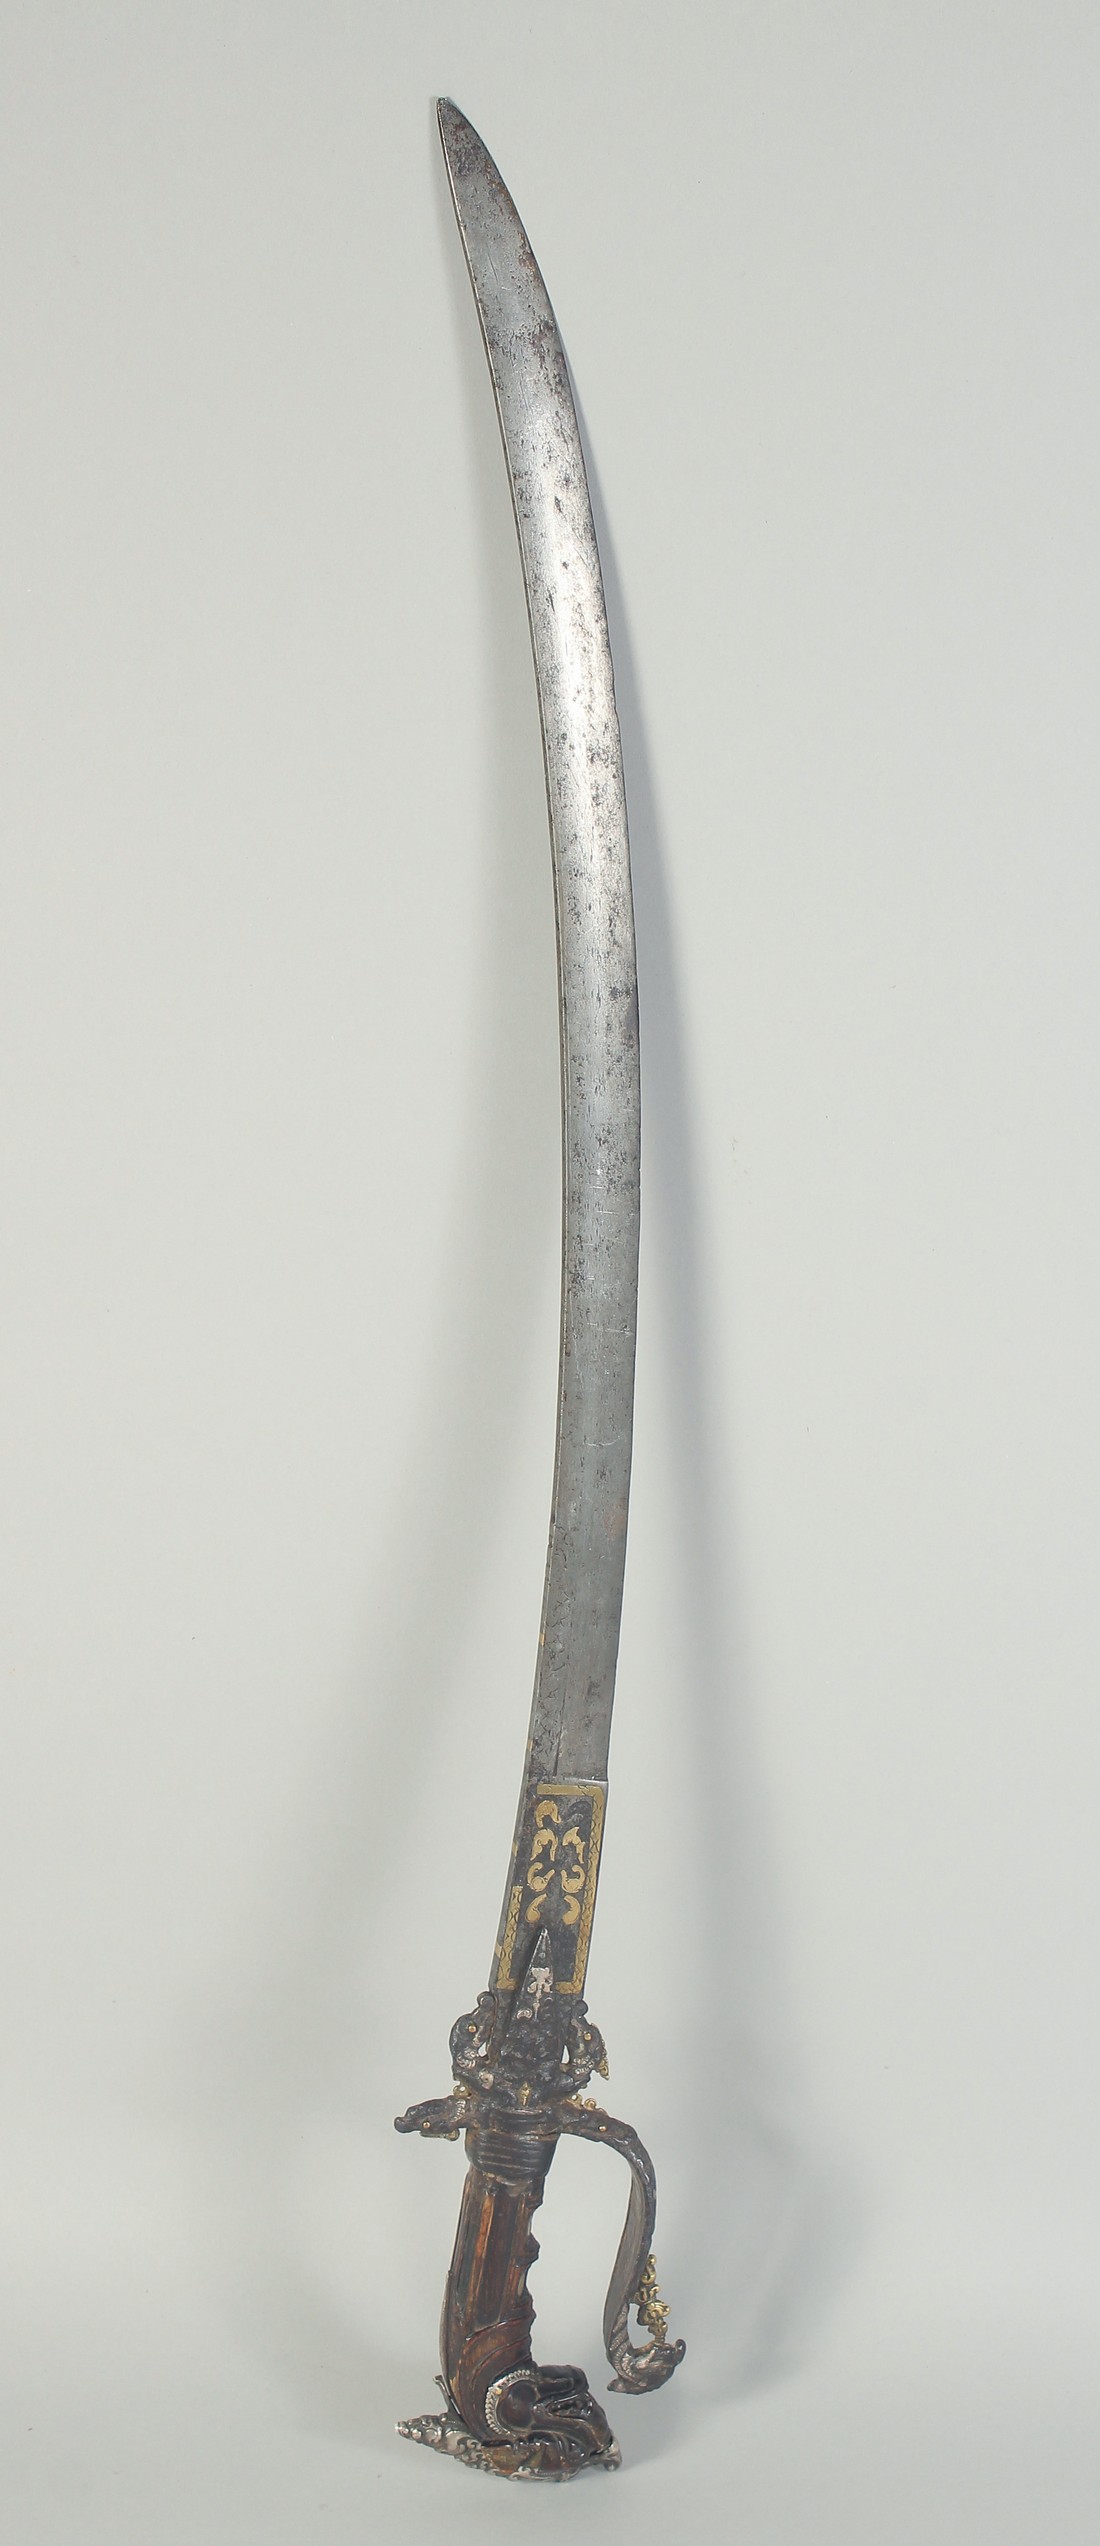 A RARE 17TH CENTURY CEYLONESE SRI LANKAN KASTANE SWORD, with carved silver mounted rhino horn handle - Image 8 of 8